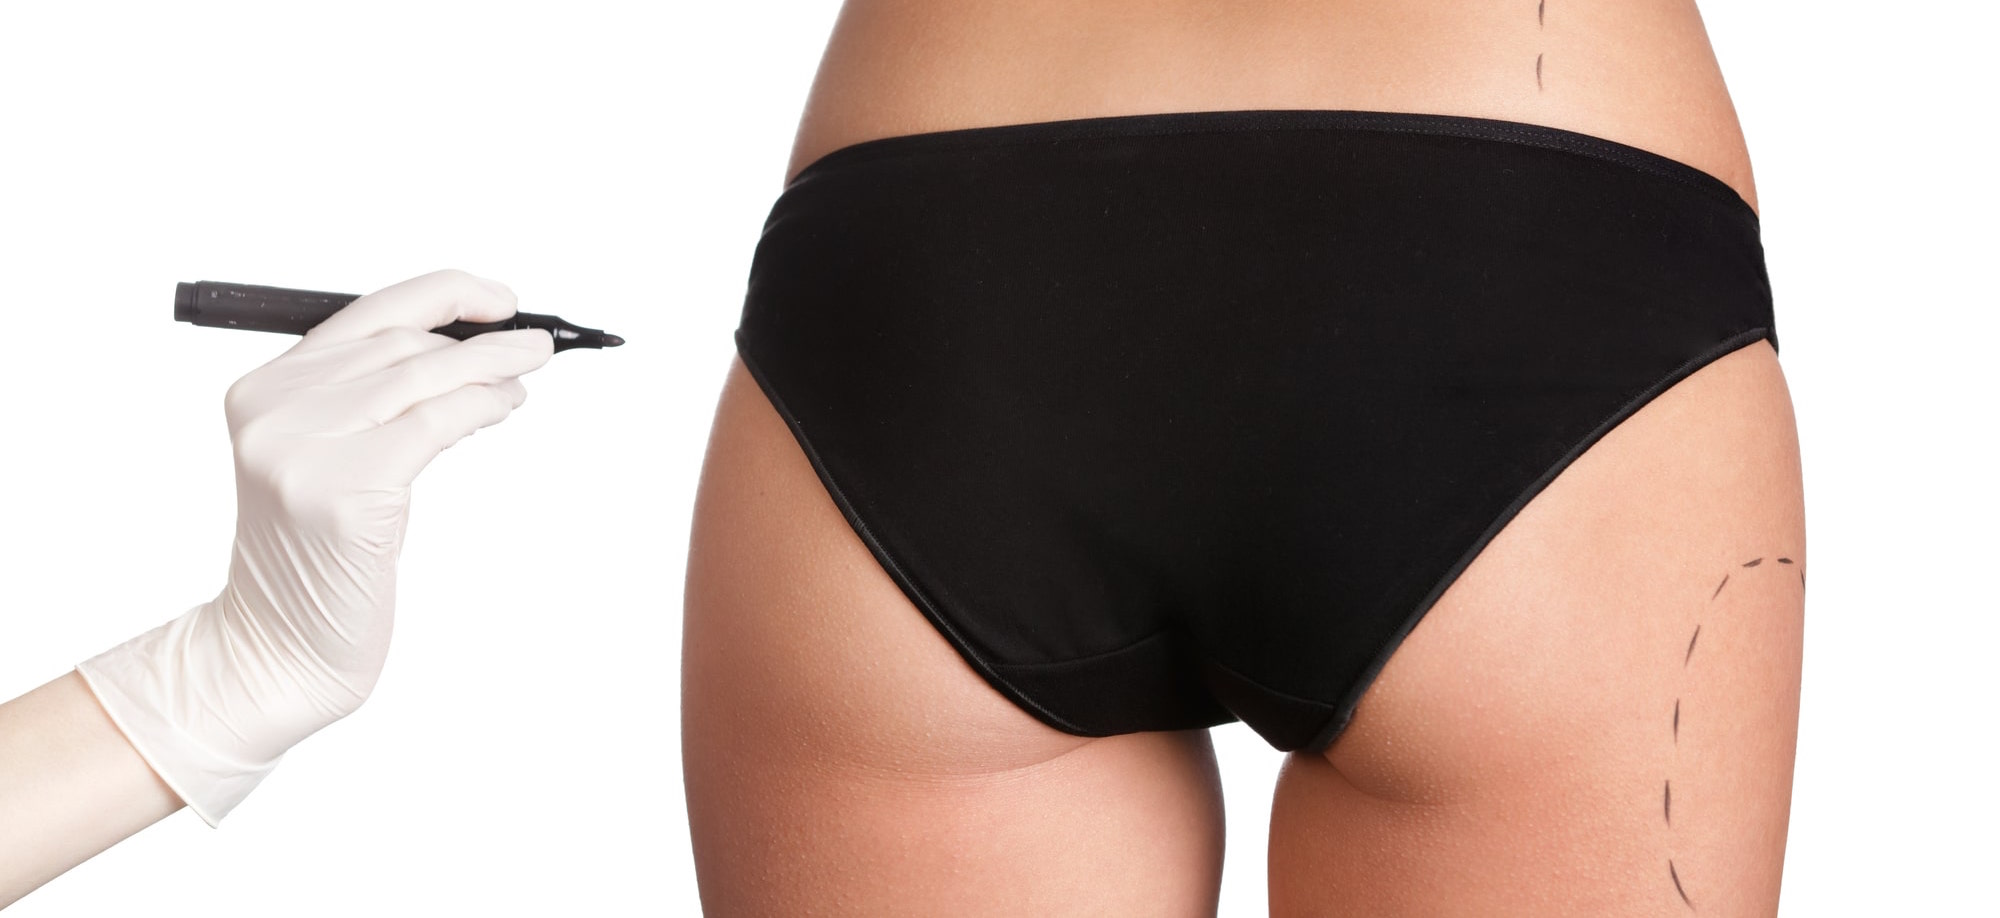 Discover the nonsurgical butt augmentation choices for BBL